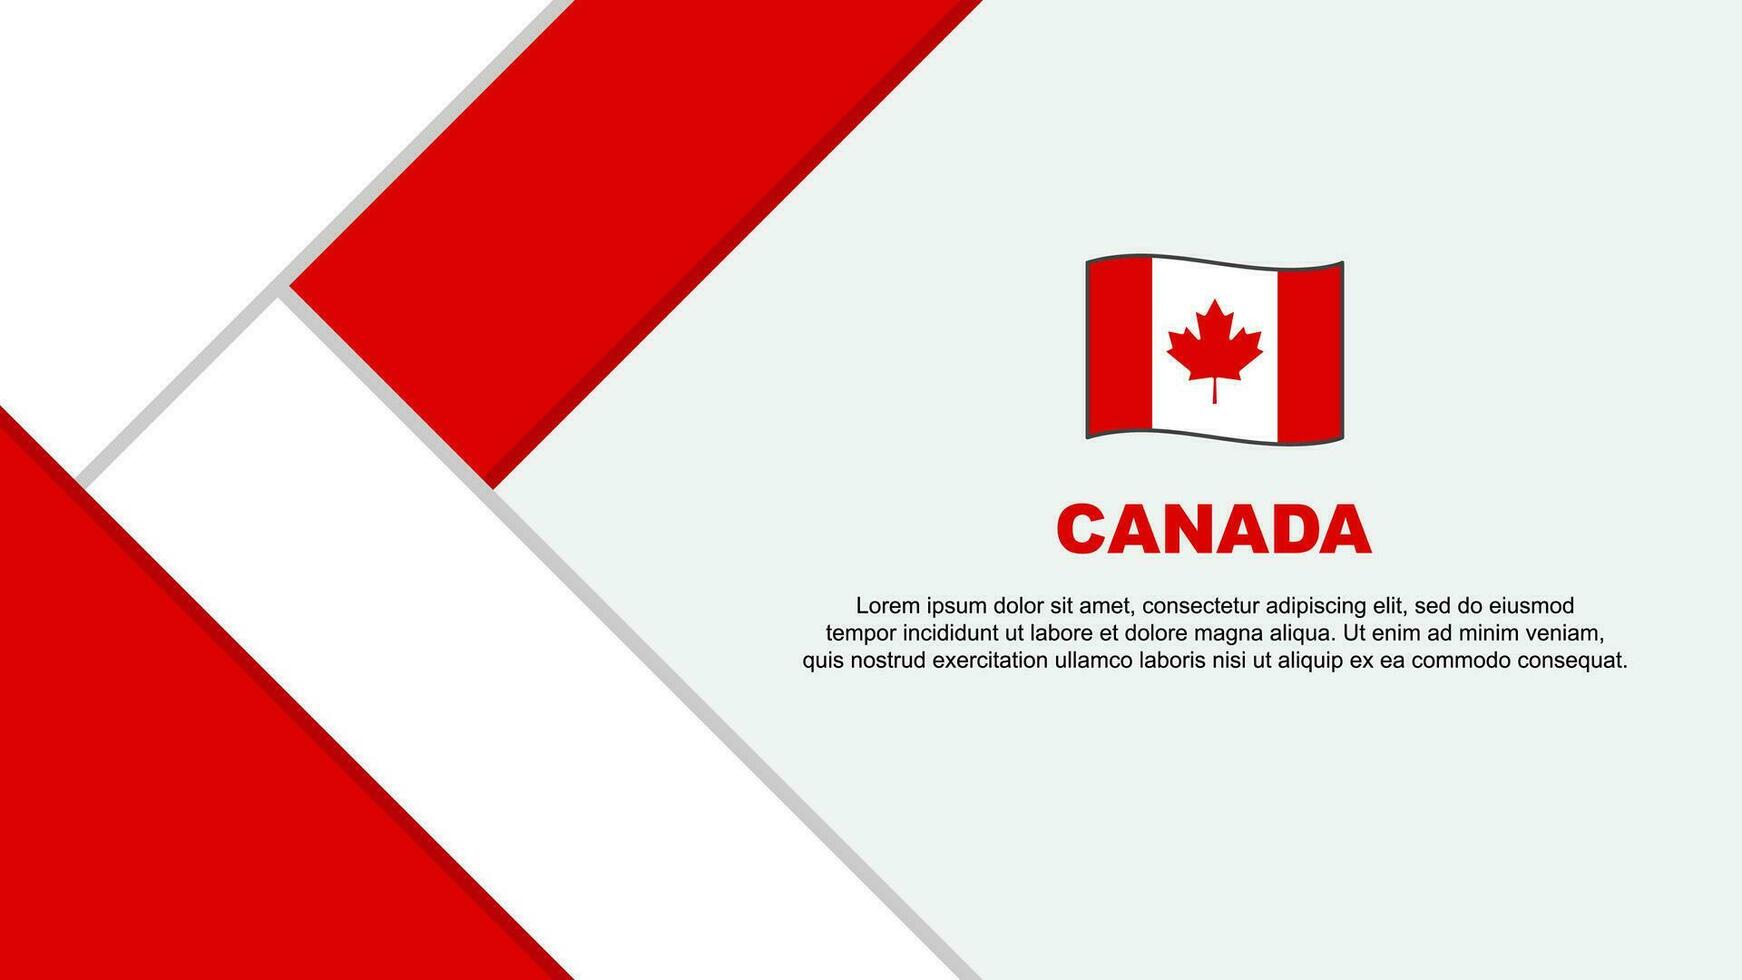 Canada Flag Abstract Background Design Template. Canada Independence Day Banner Cartoon Vector Illustration. Canada Illustration